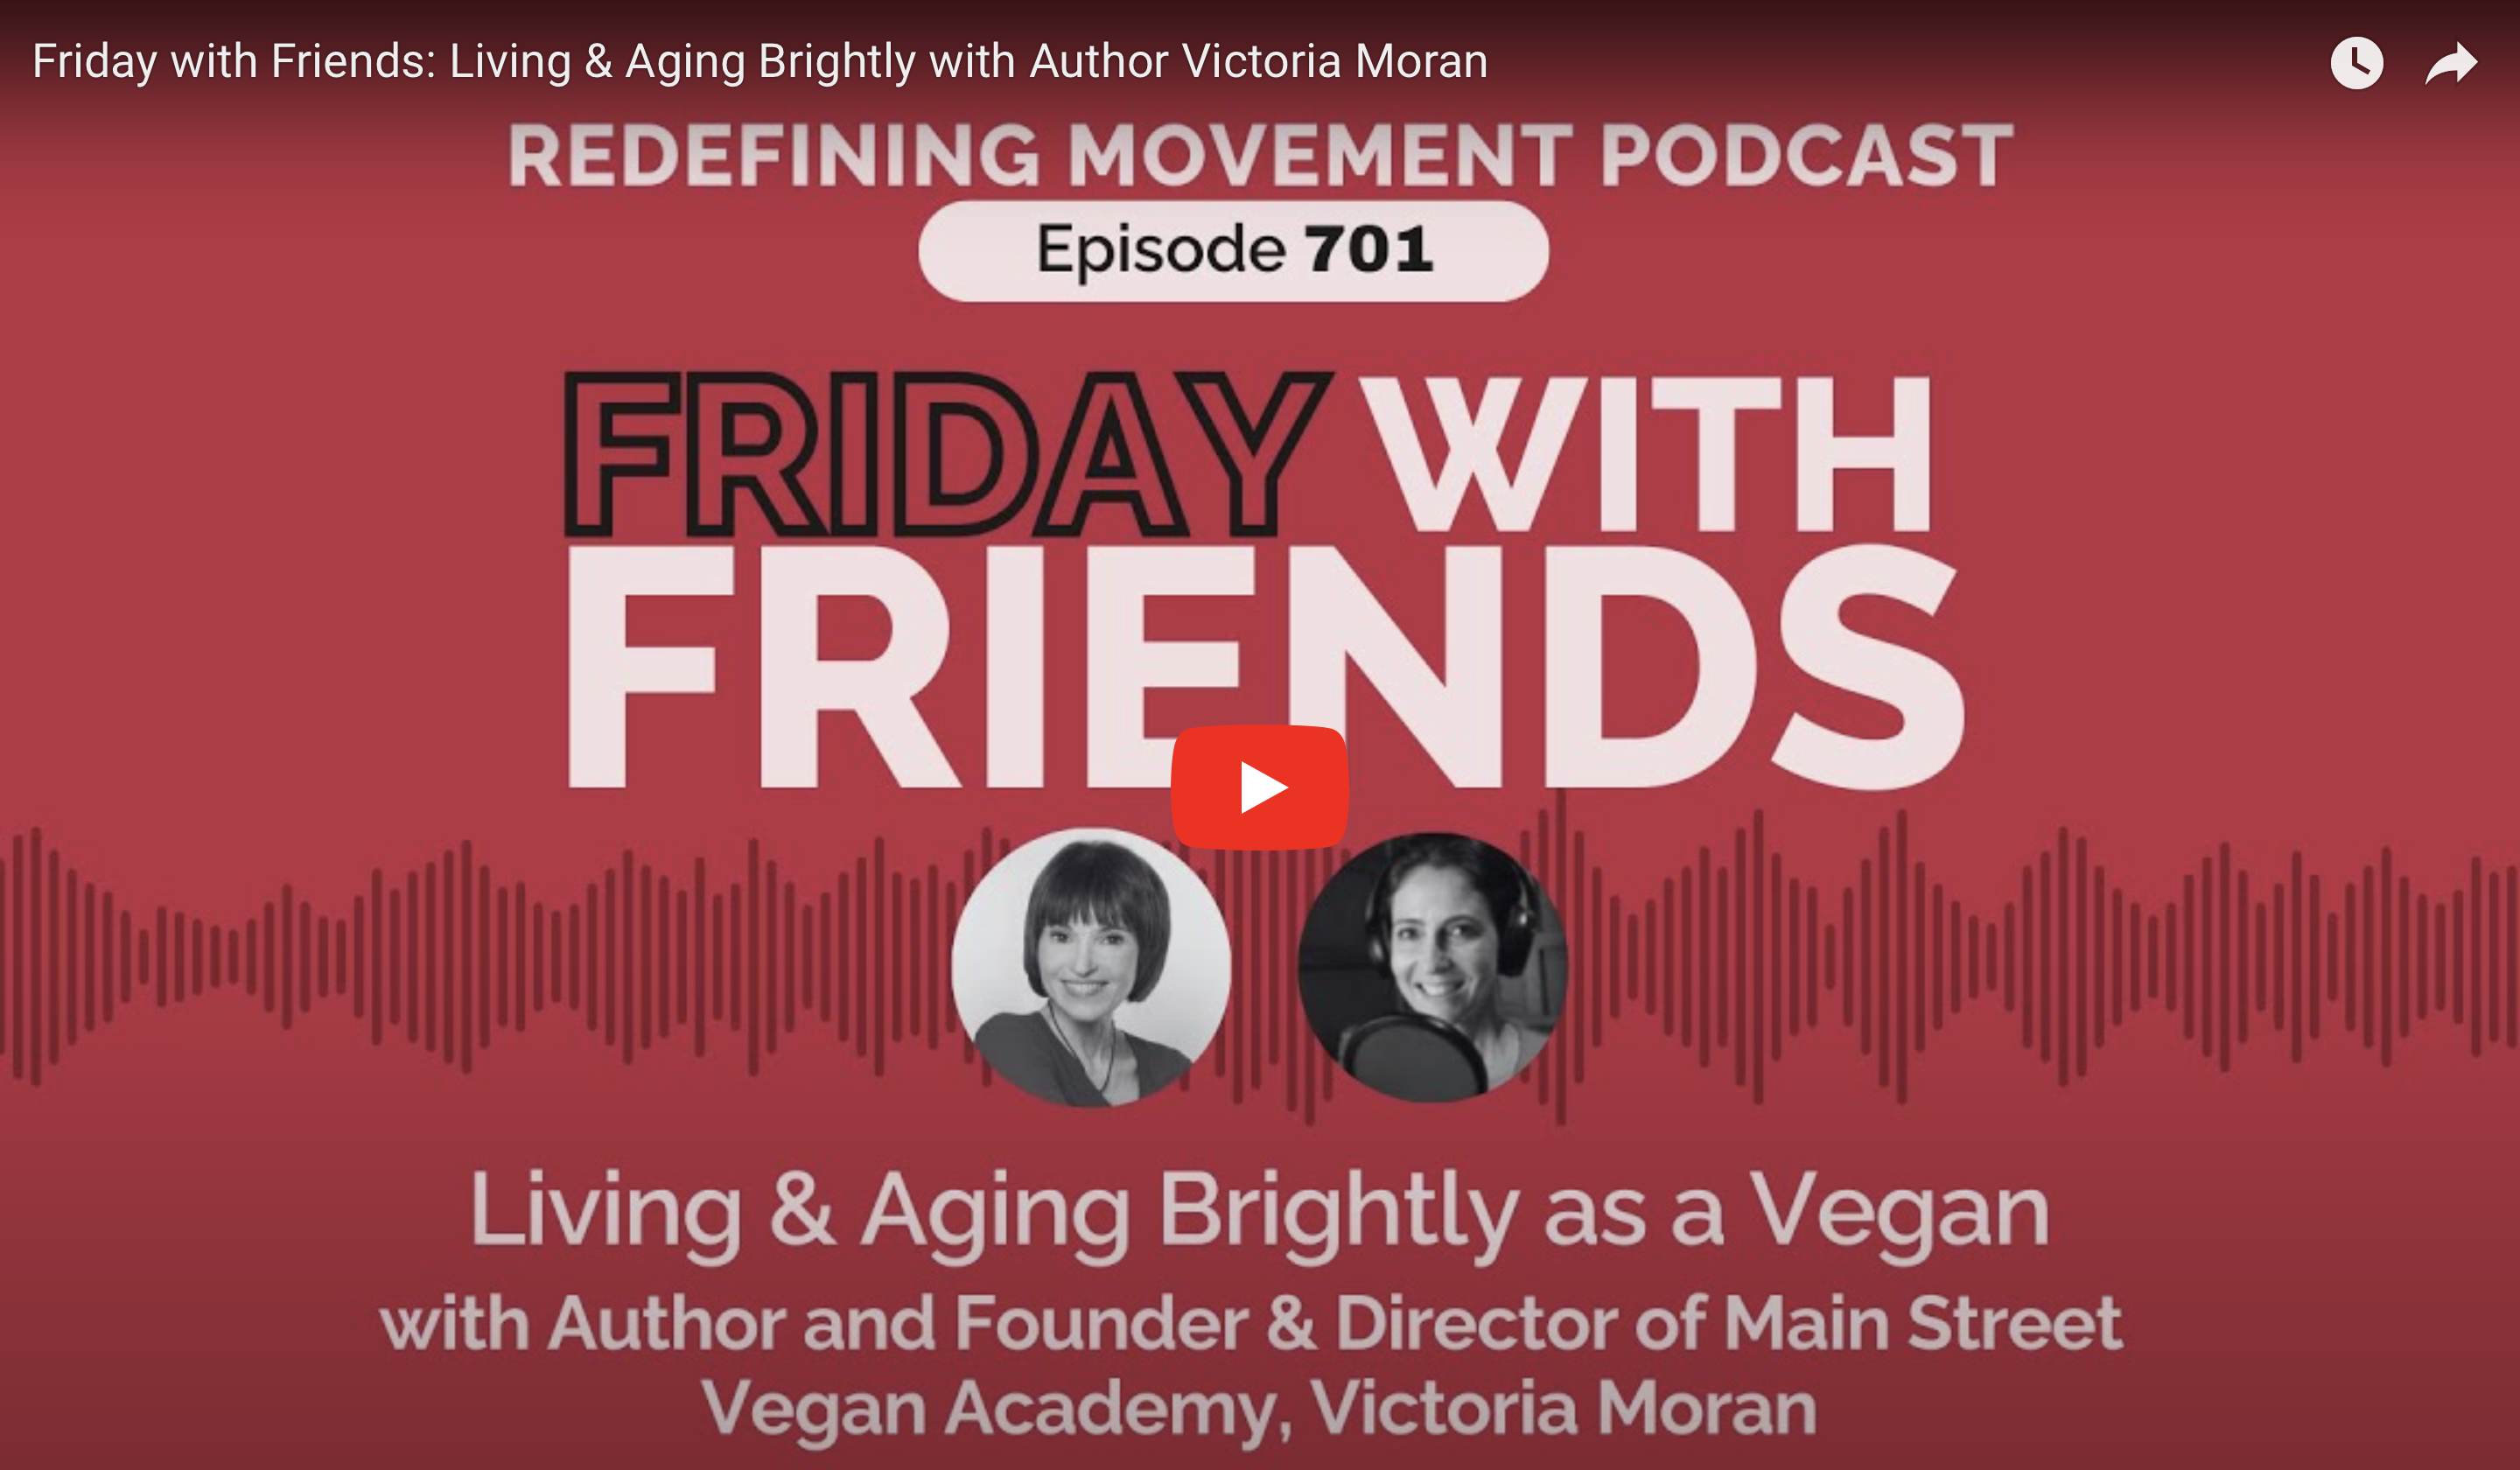 Victoria Moran on the Redefining Movement Podcast